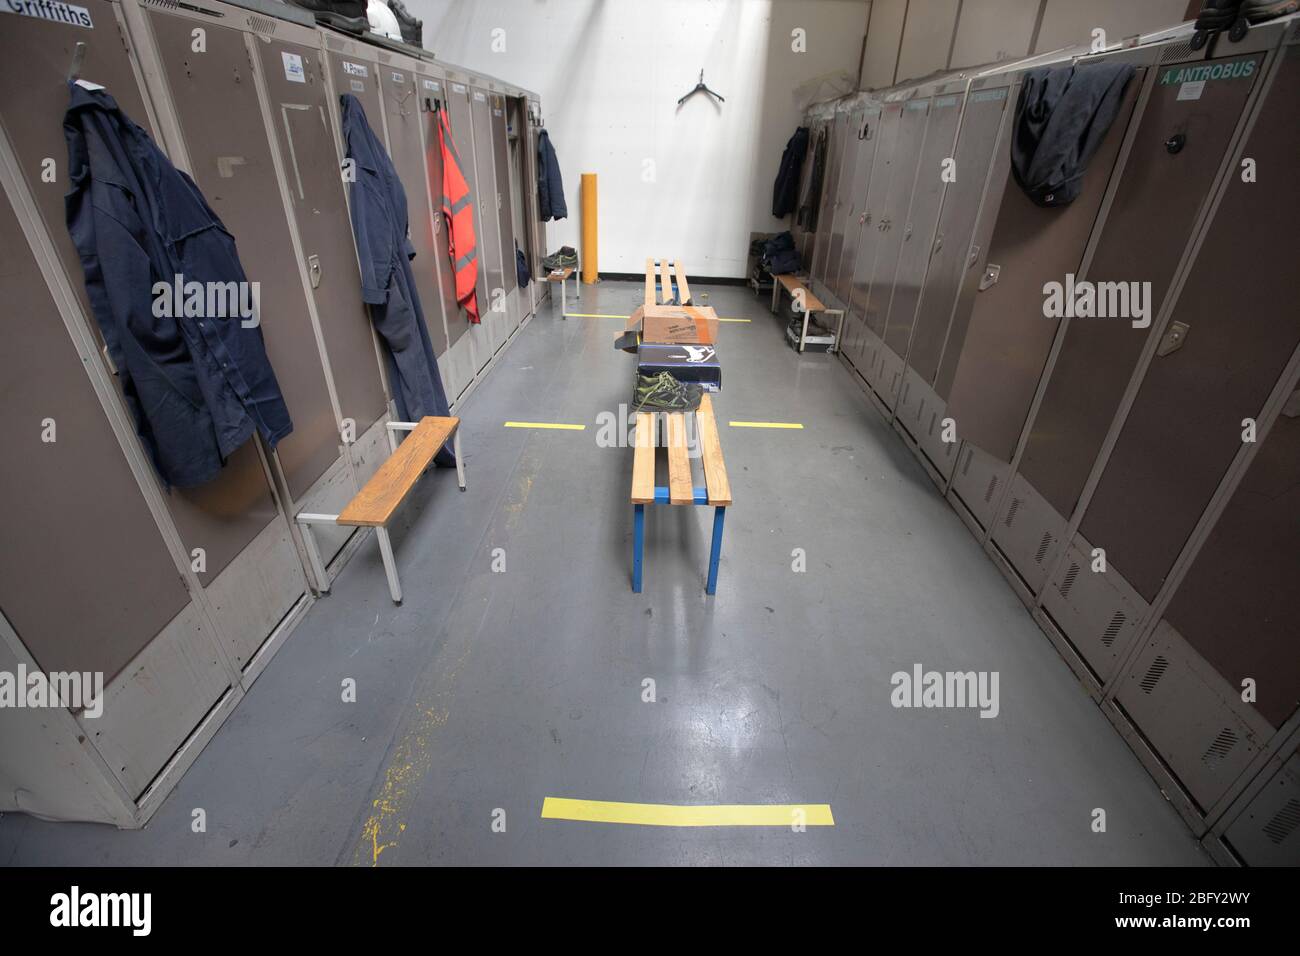 A workers locker room with floor markings at the Vauxhall car factory photographed undergoing preparedness tests and redesign ahead of re-opening following the COVID-19 outbreak. Located in Ellesmere Port, Wirral, the factory opened in 1962 and currently employs around 1100 workers. It ceased production on 17 March 2020 and will only resume work upon the advice of the UK Government, which will involve stringent physical distancing measures being in place across the site. Stock Photo